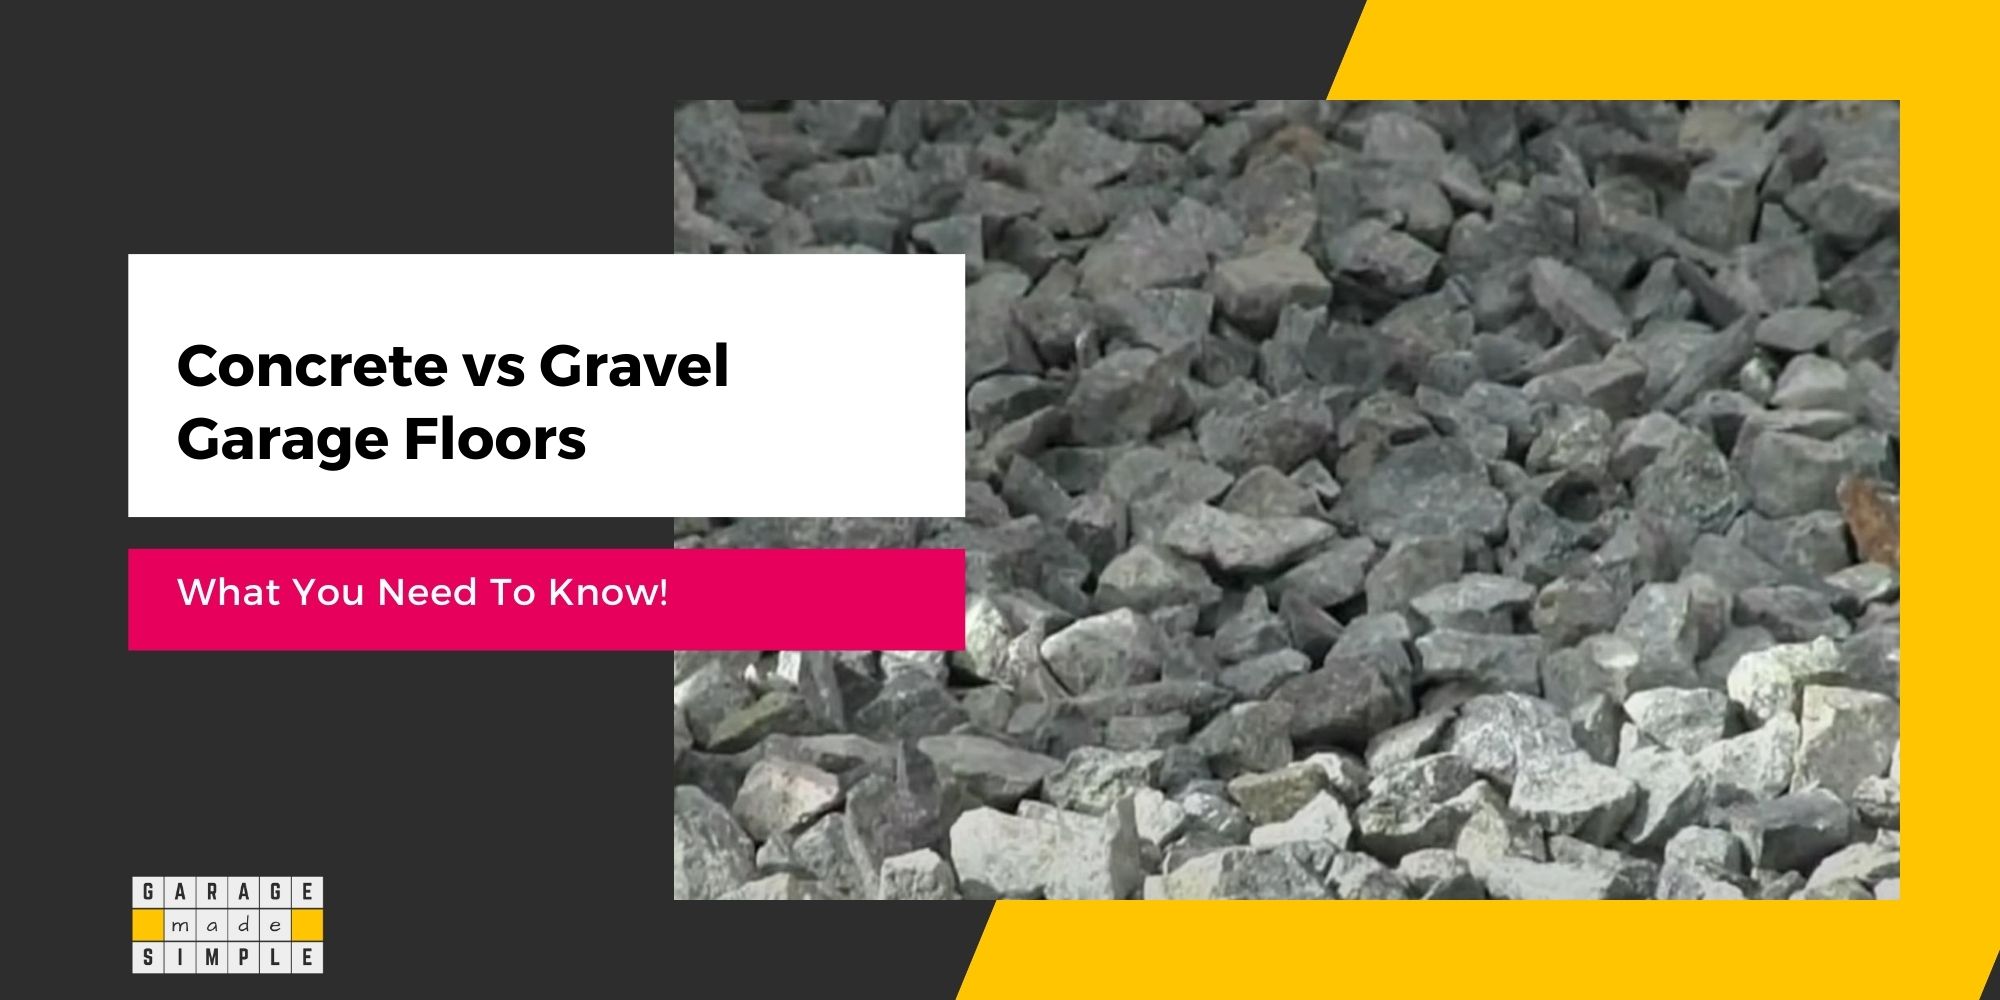 What You Need To Know About Concrete Vs Gravel Garage Floors